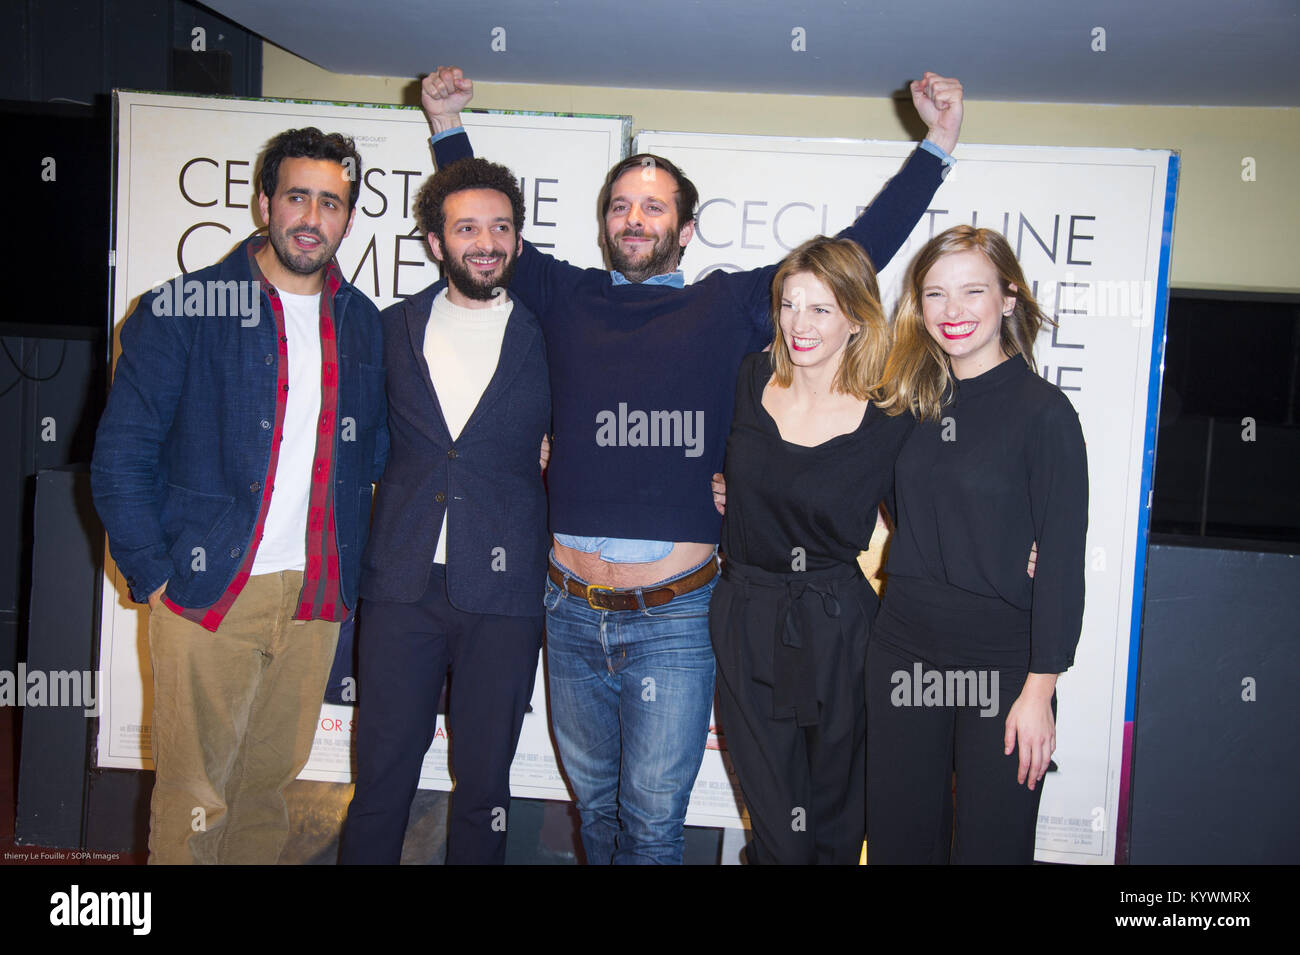 Paris, Ile de France, France. 16th Jan, 2018. French actors Jonathan Cohen, William Lebghil, Director Victor Saint Macary, french actress Camille Razat, Margot Bancilhon at the premiere ''Ami Ami'' in the cinema ugc cine cite les halles. Credit: Thierry Le Fouille/SOPA/ZUMA Wire/Alamy Live News Stock Photo